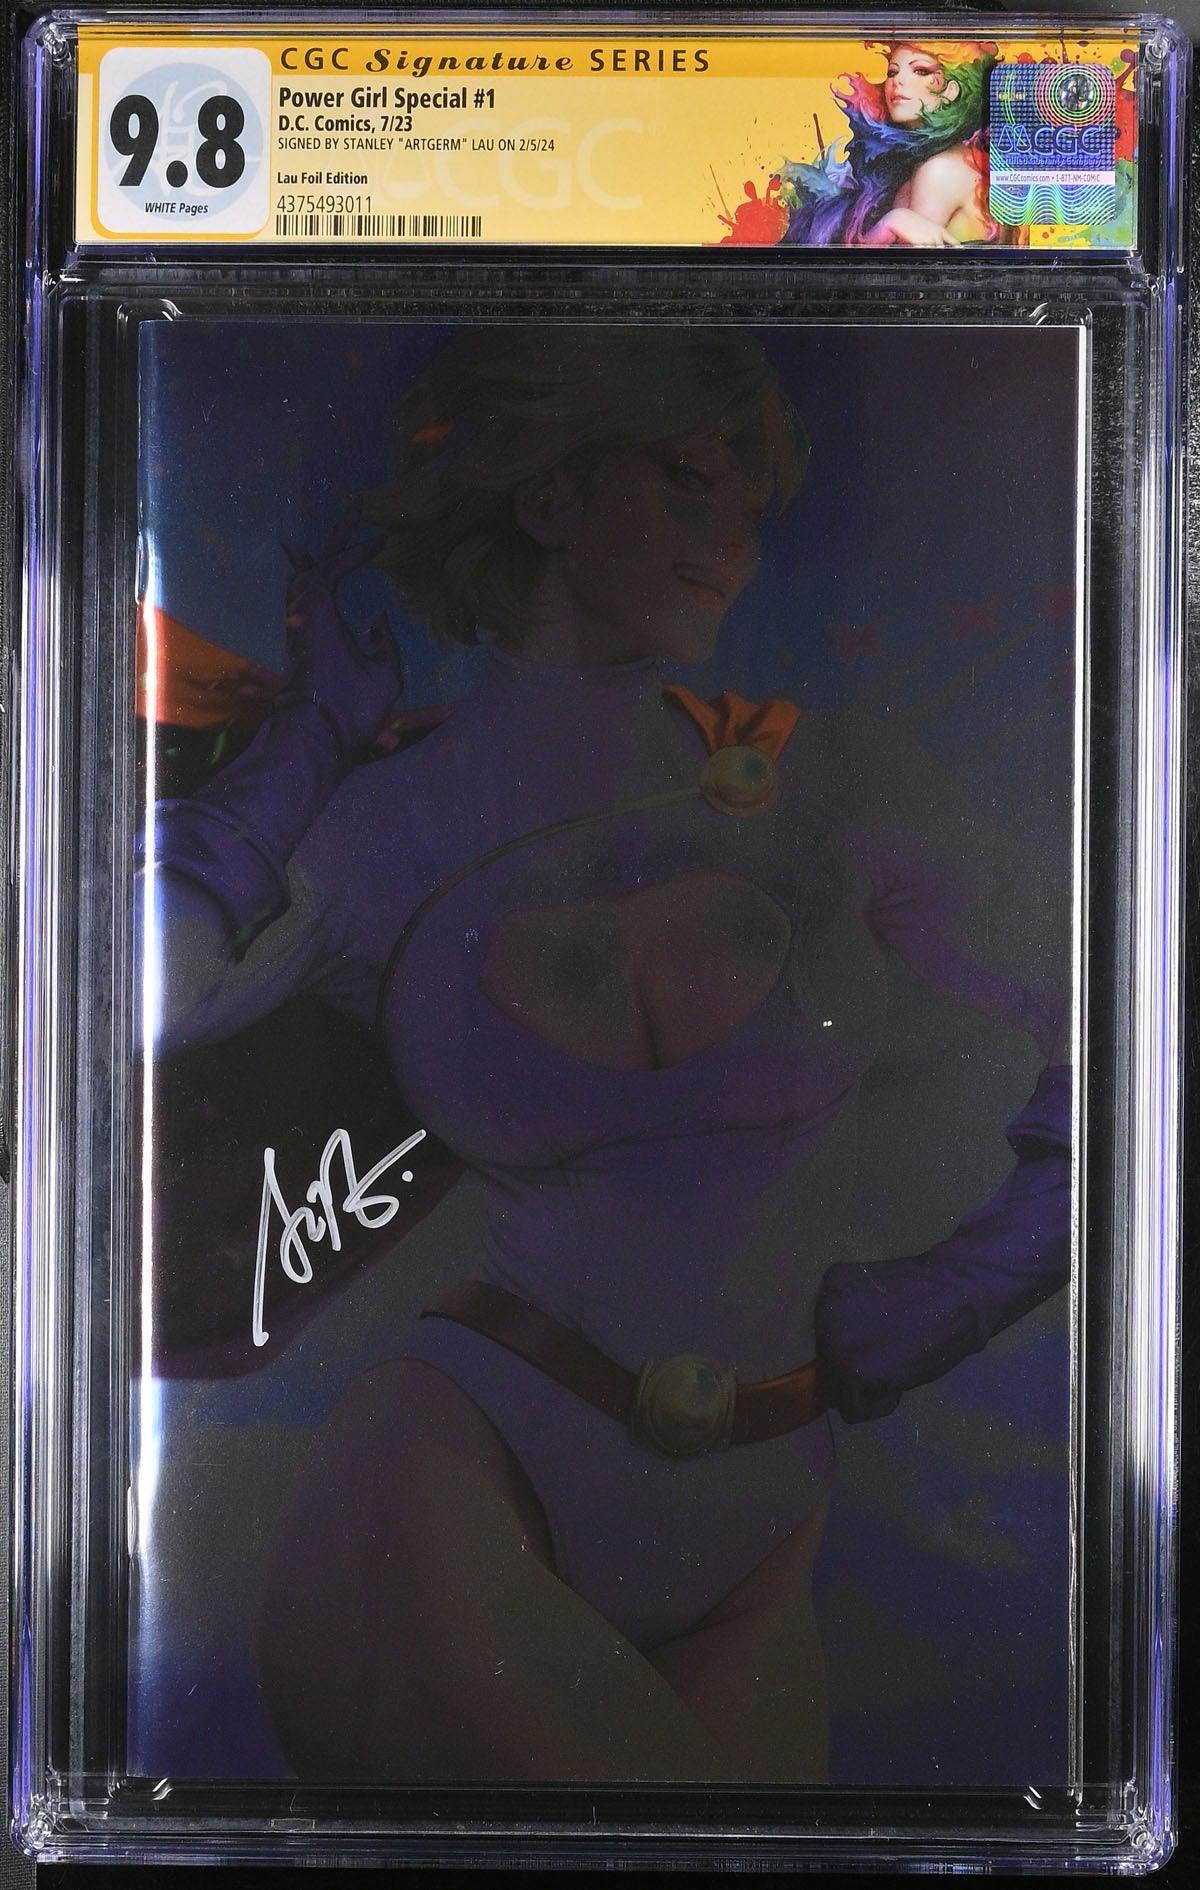 CGC POWER GIRL SPECIAL #1 LAU FOIL EDITION (9.8) SIGNATURE SERIES - SIGNED BY STANLEY "ARTGERM"